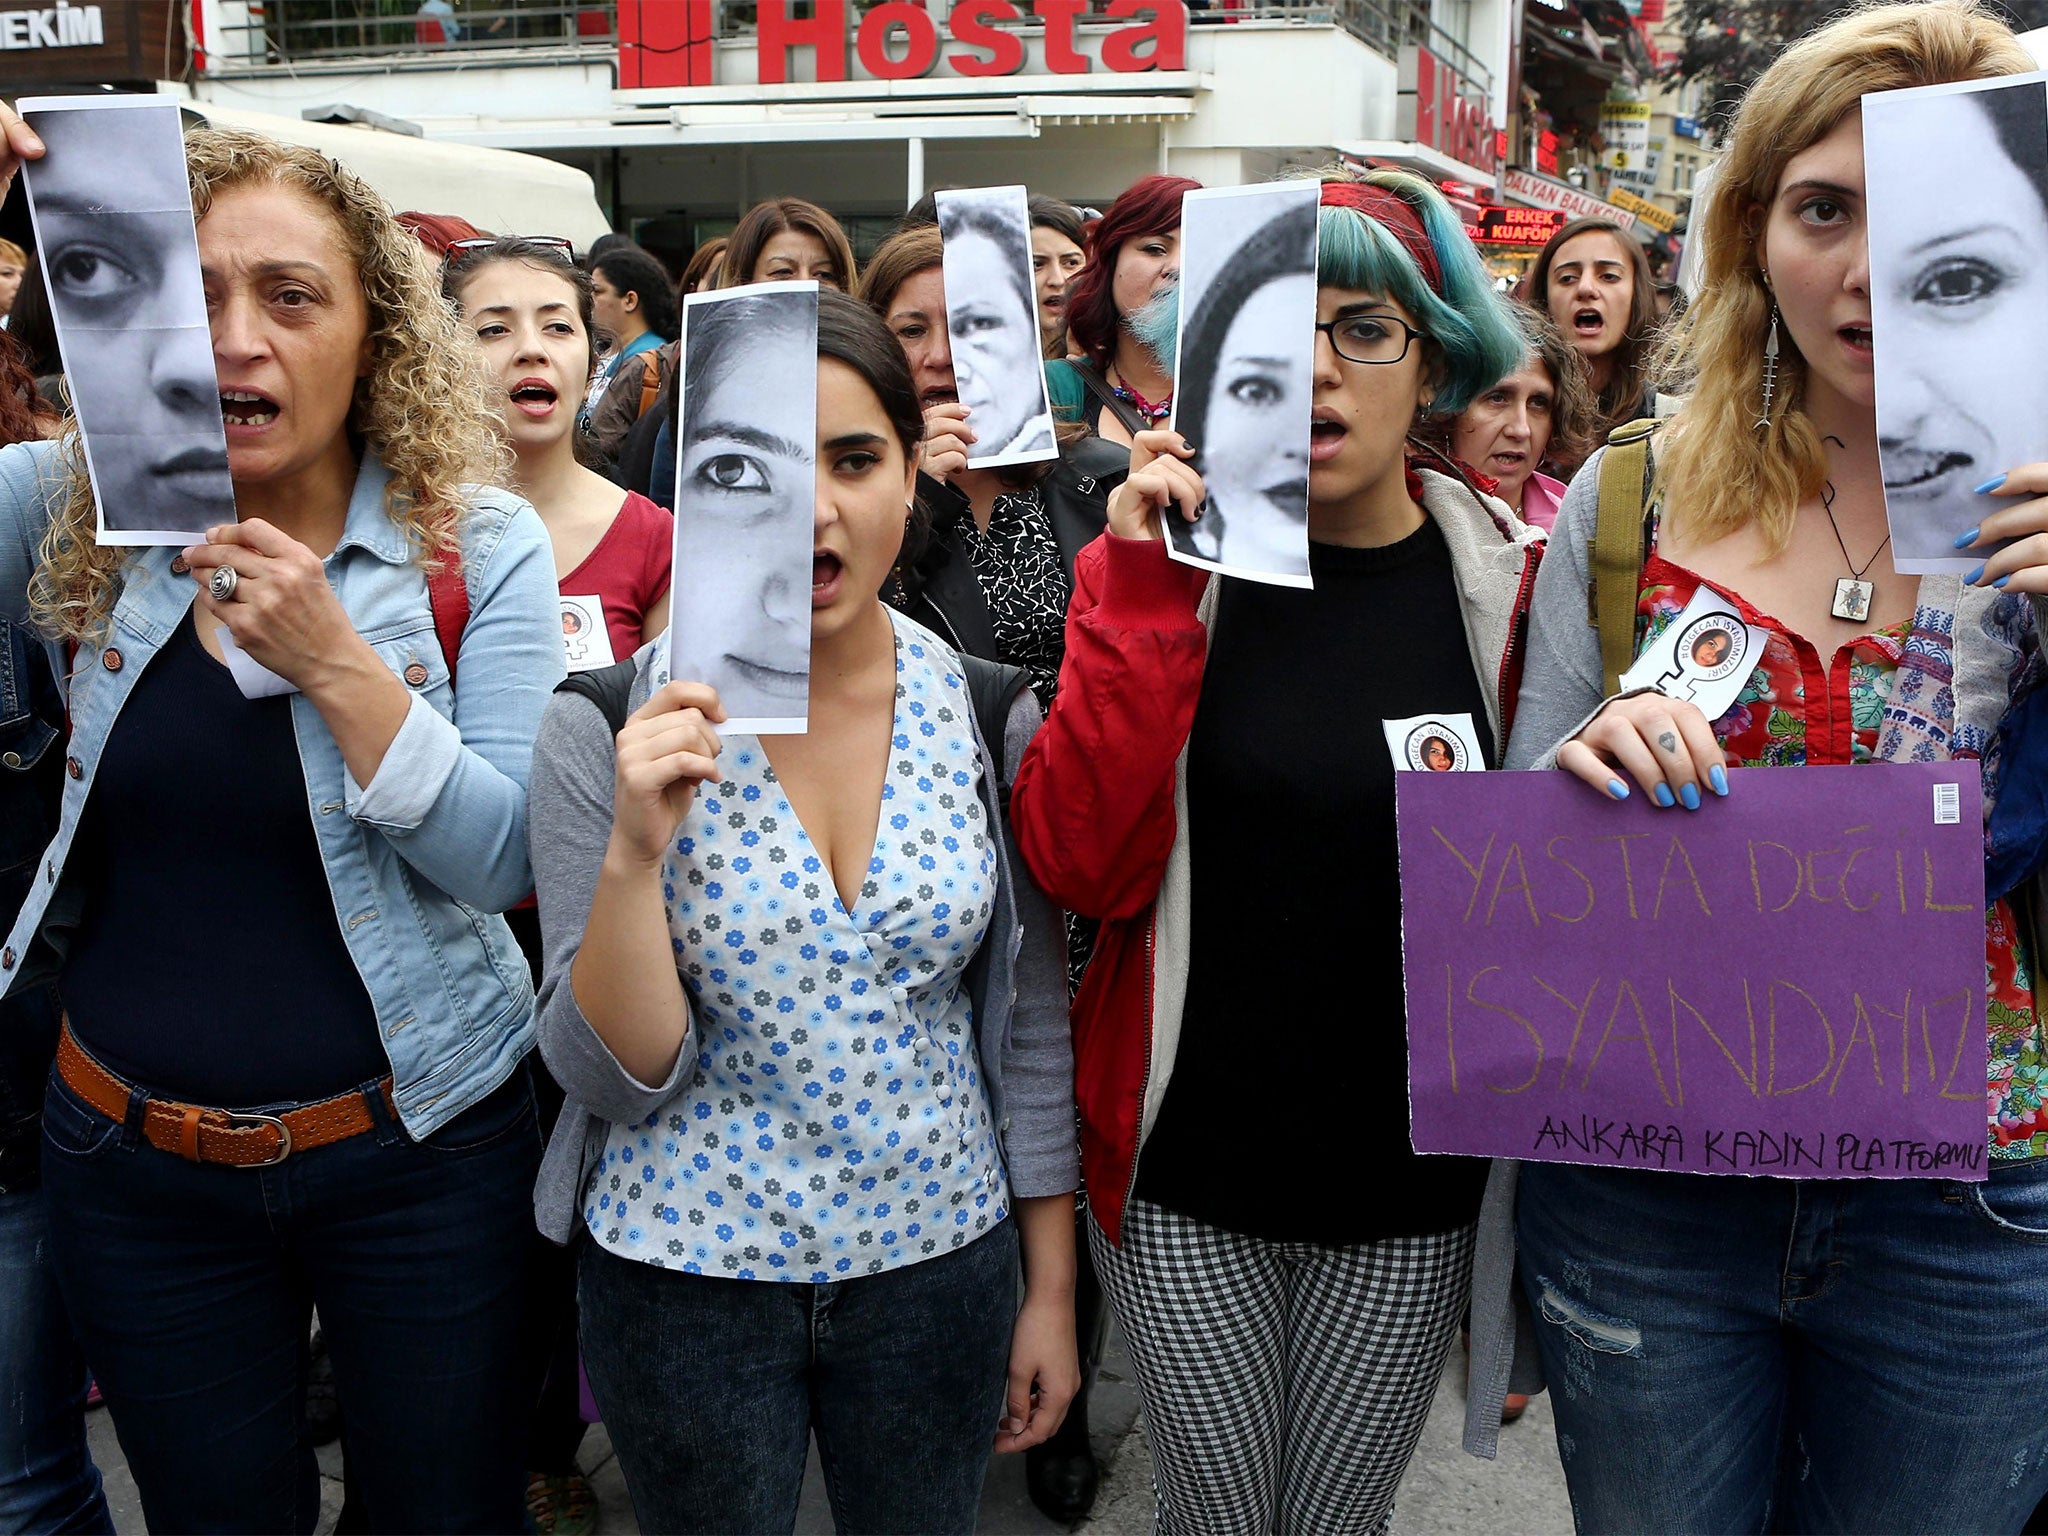 Turkish women display photographs of victims of violence during a 2011 demonstration. The pictures include those of Özgecan Aslan, a student who was killed while resisting an attempted rape.